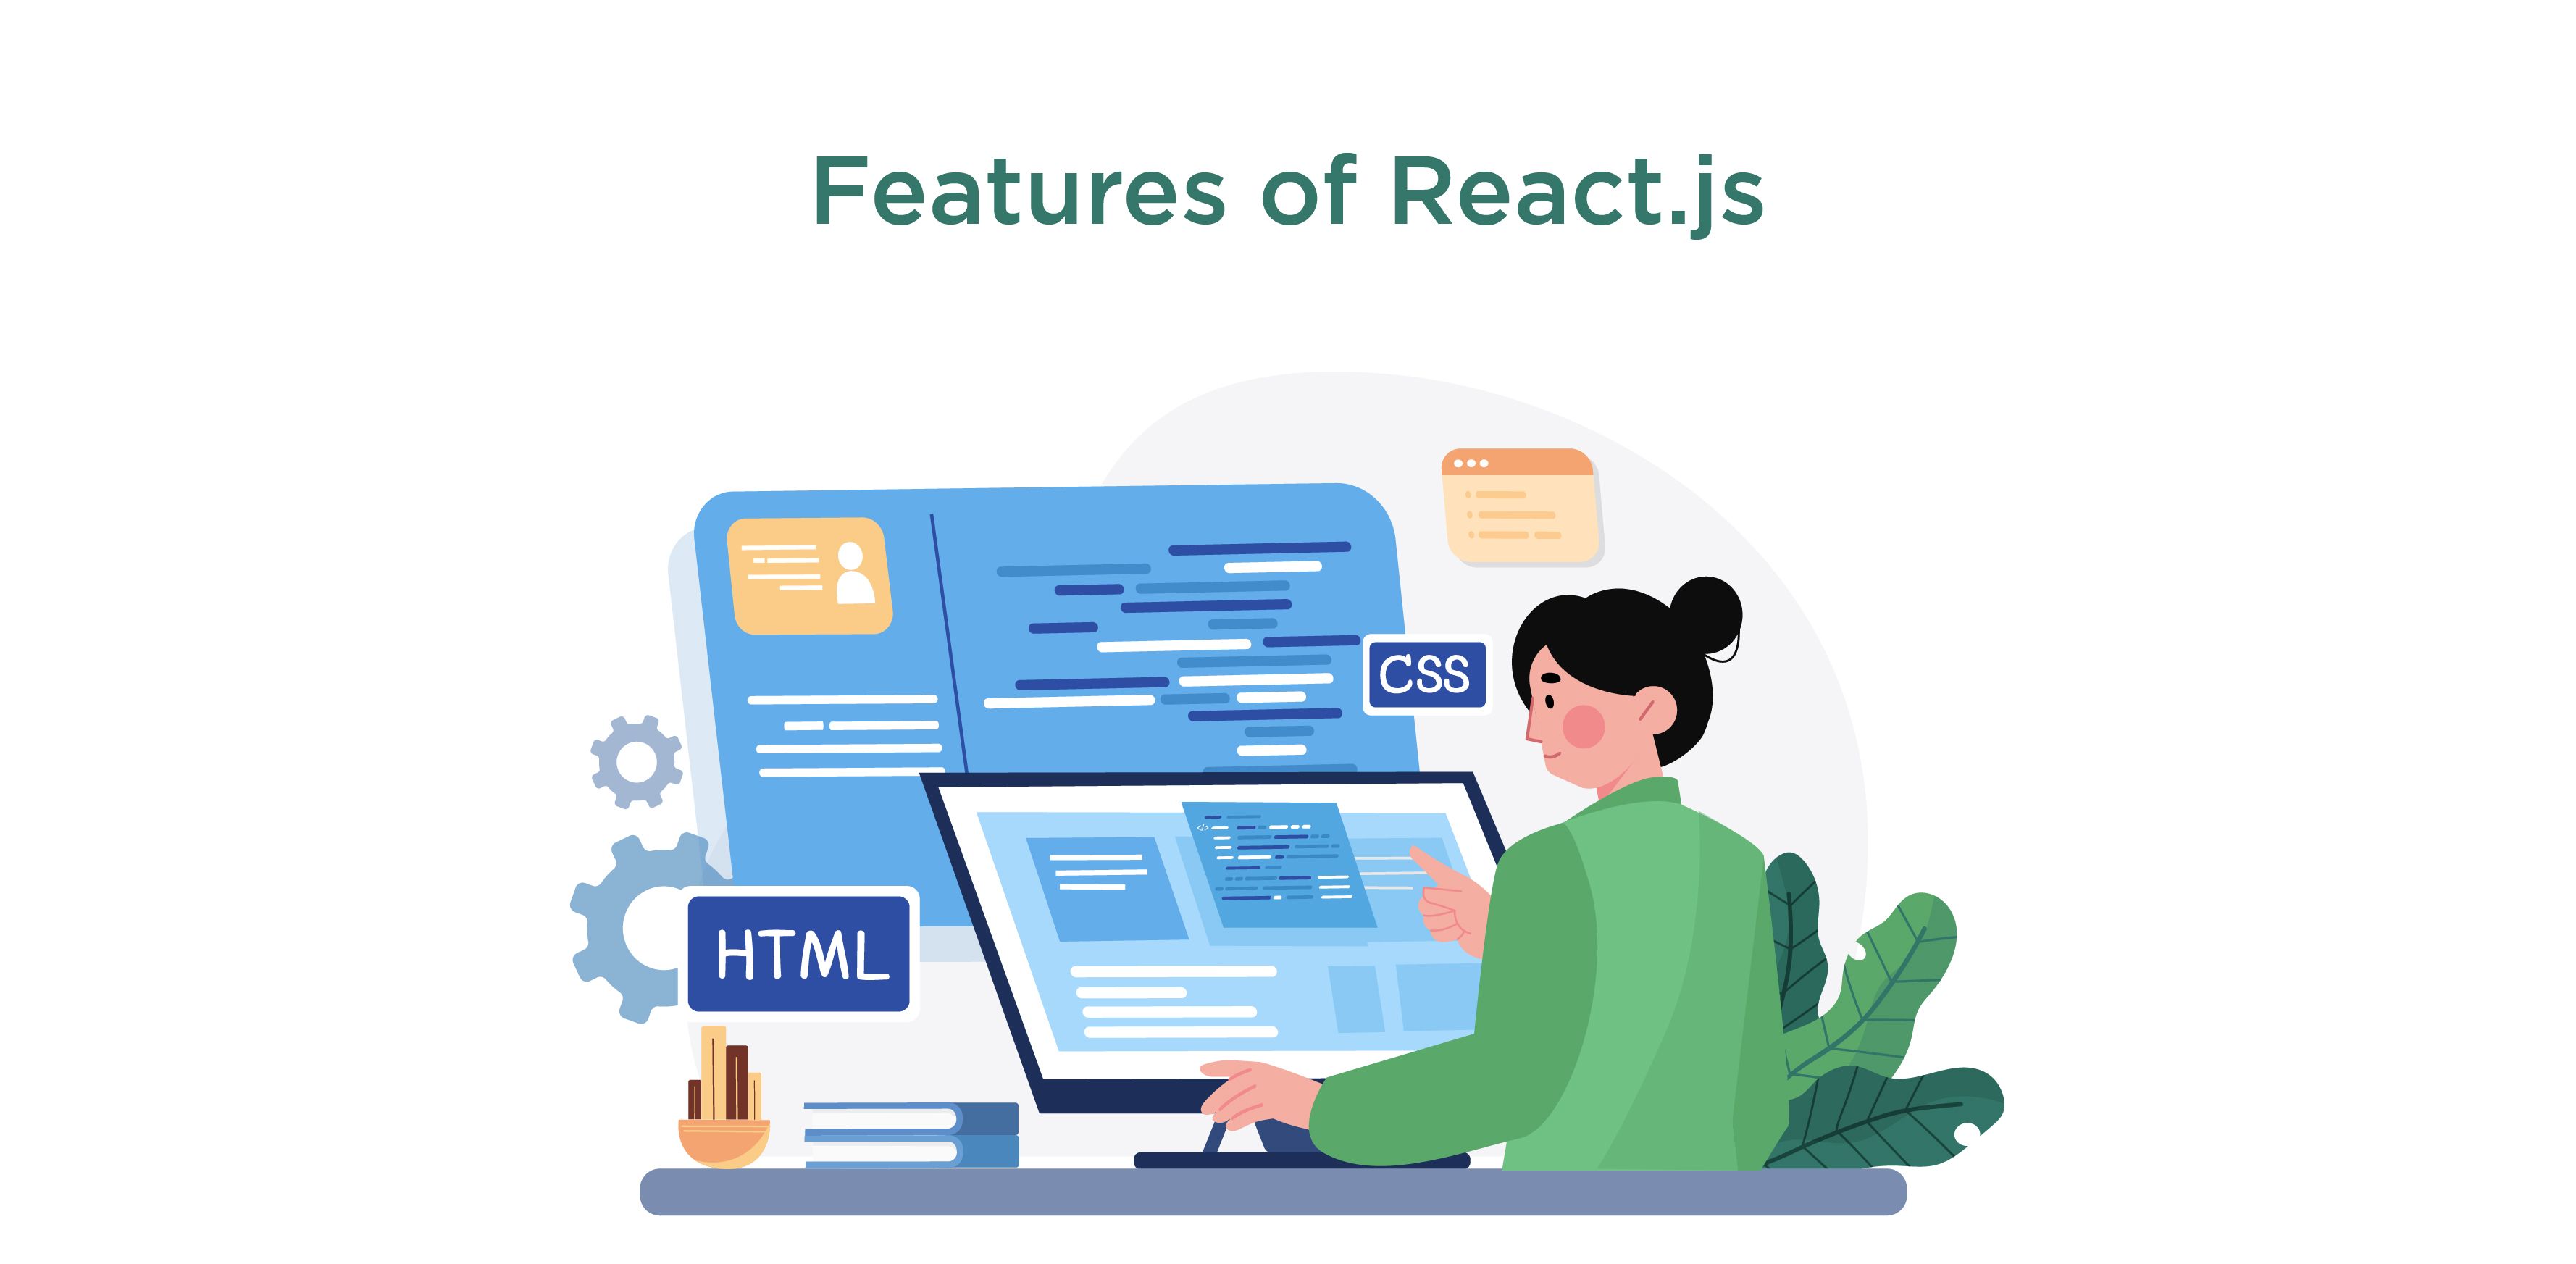 Features of React.js